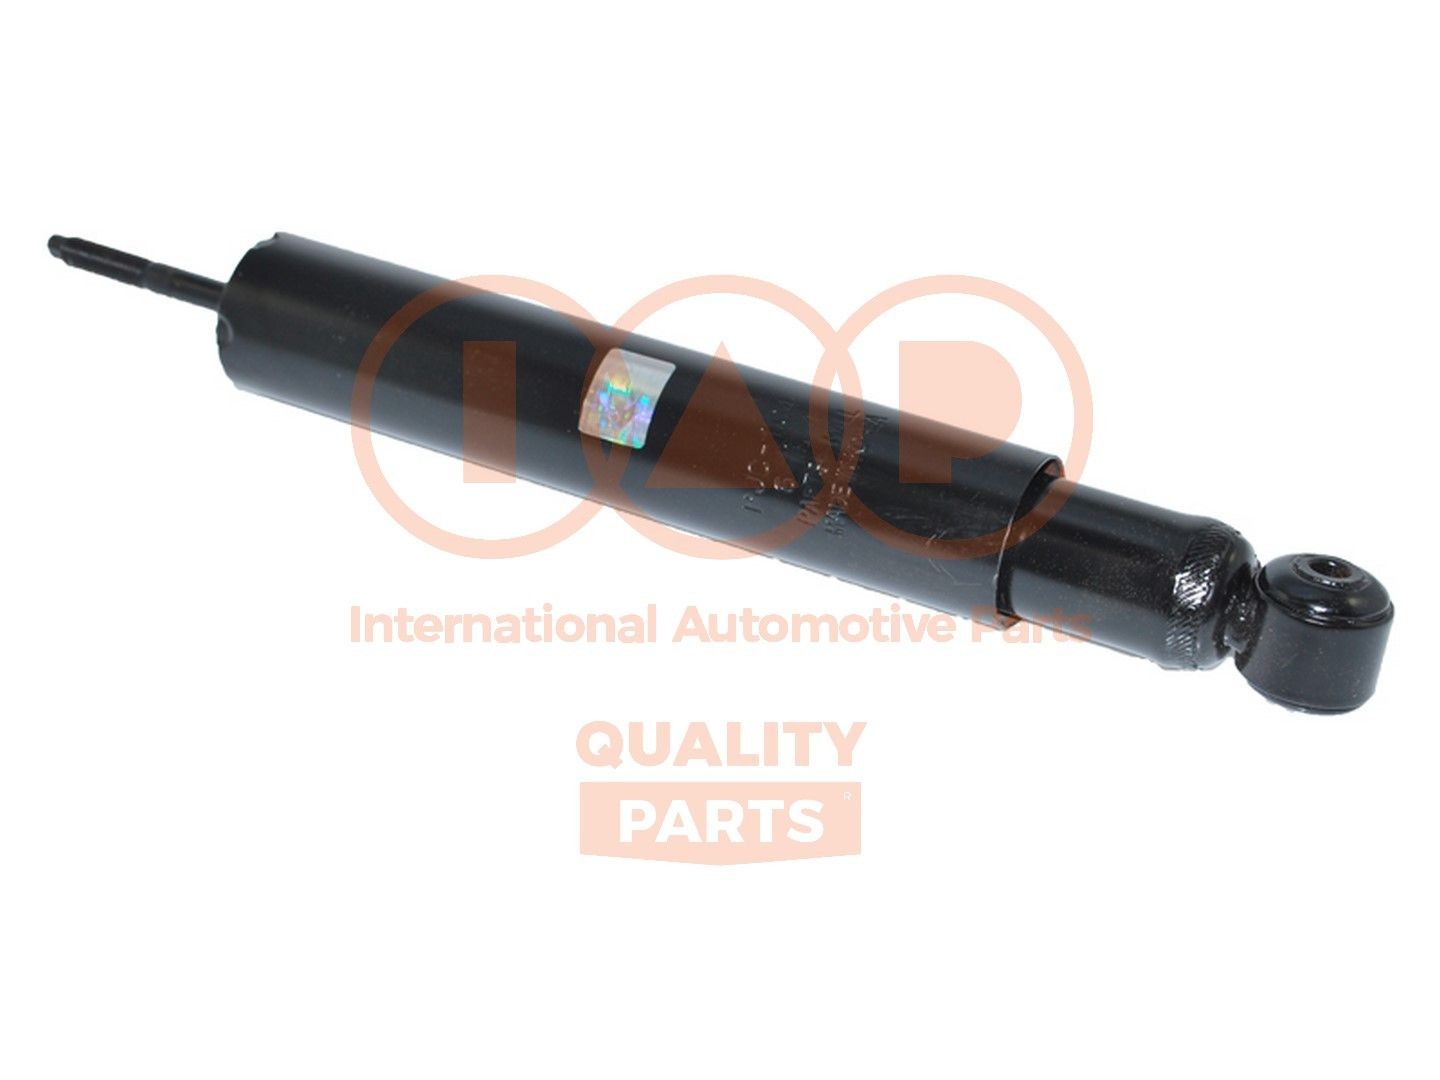 IAP QUALITY PARTS 504-20031 Shock absorber 72118762